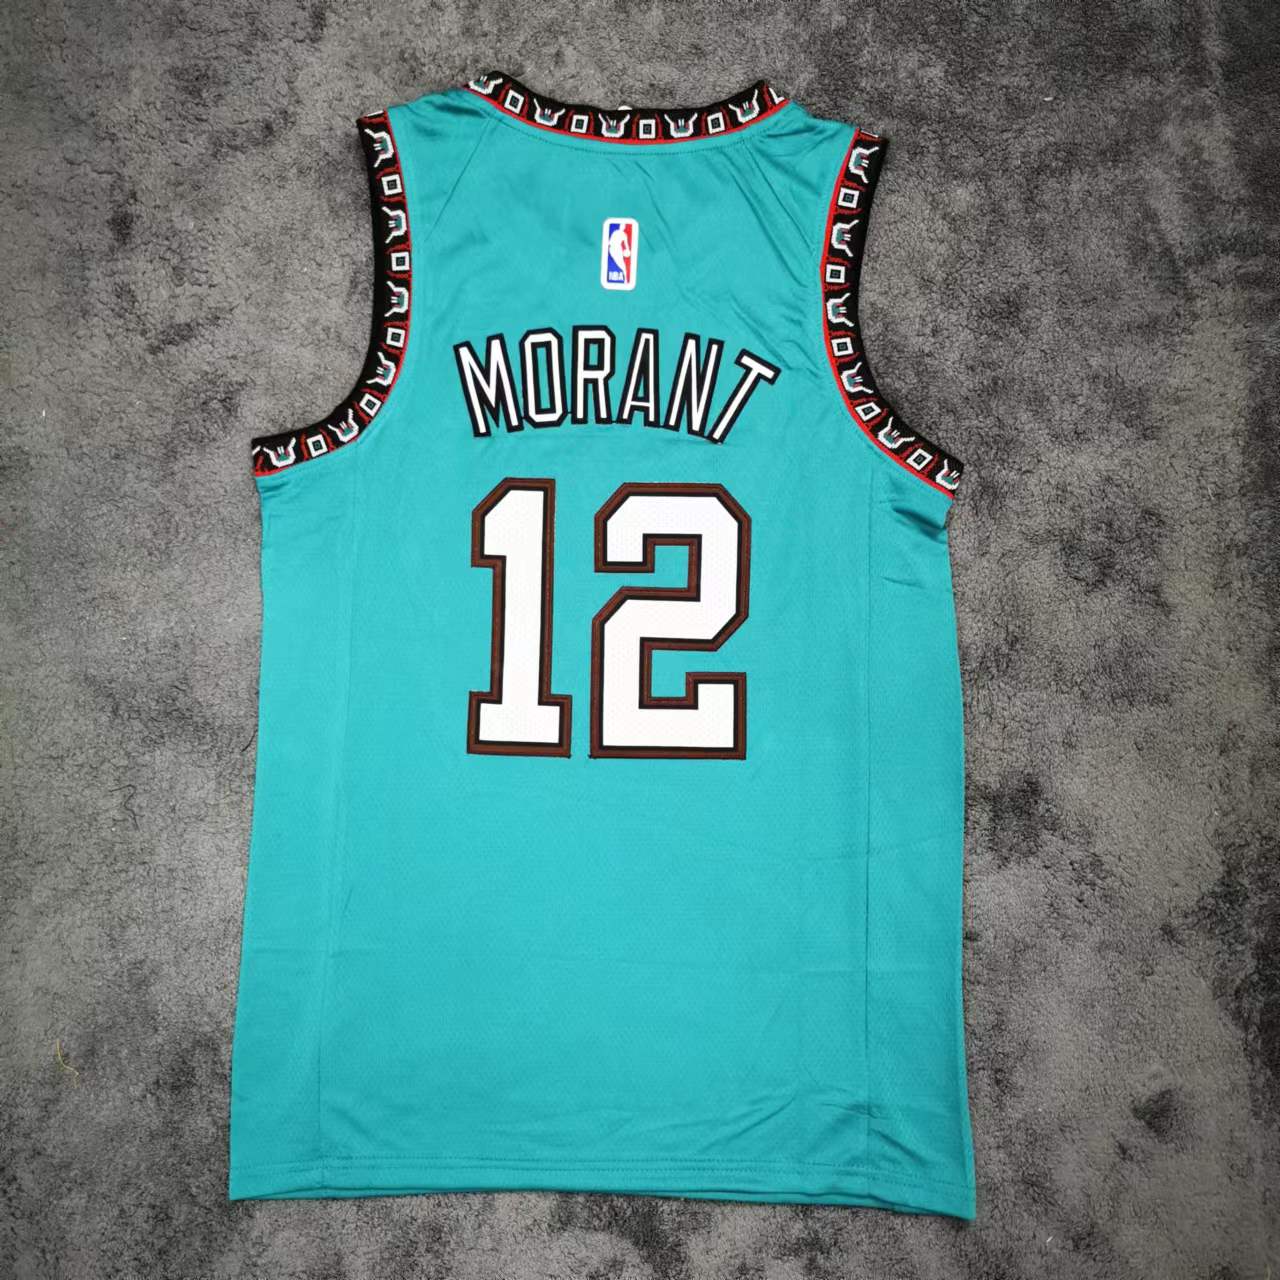 CASTLE new design basketball jersey sando good quality muscle sports  outdoor jersey #ZY02